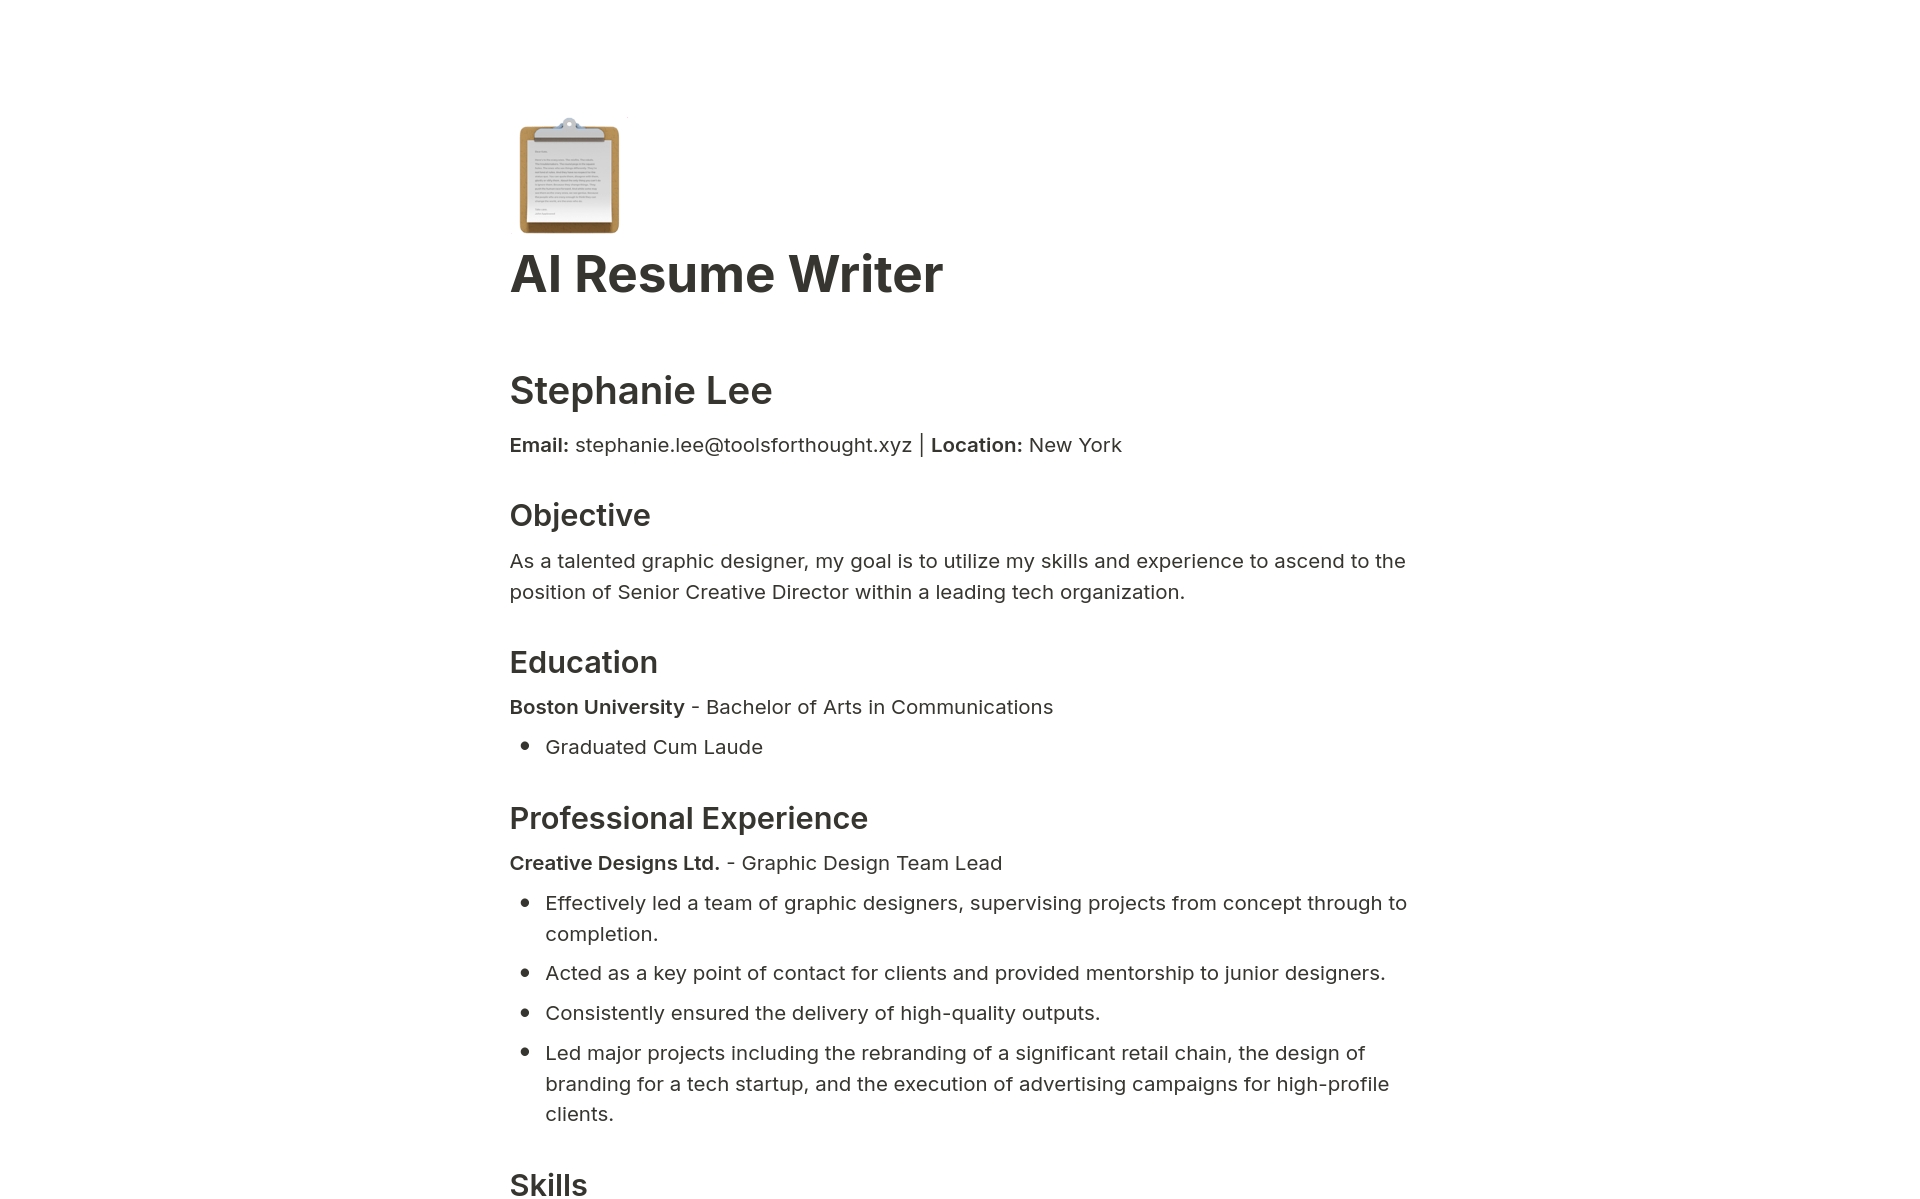 Enhance your job application with Notion AI Resume Writer. Quickly input your career details and let AI transform them into a polished, professional resume tailored to your industry. Perfect for anyone looking to streamline their job search.